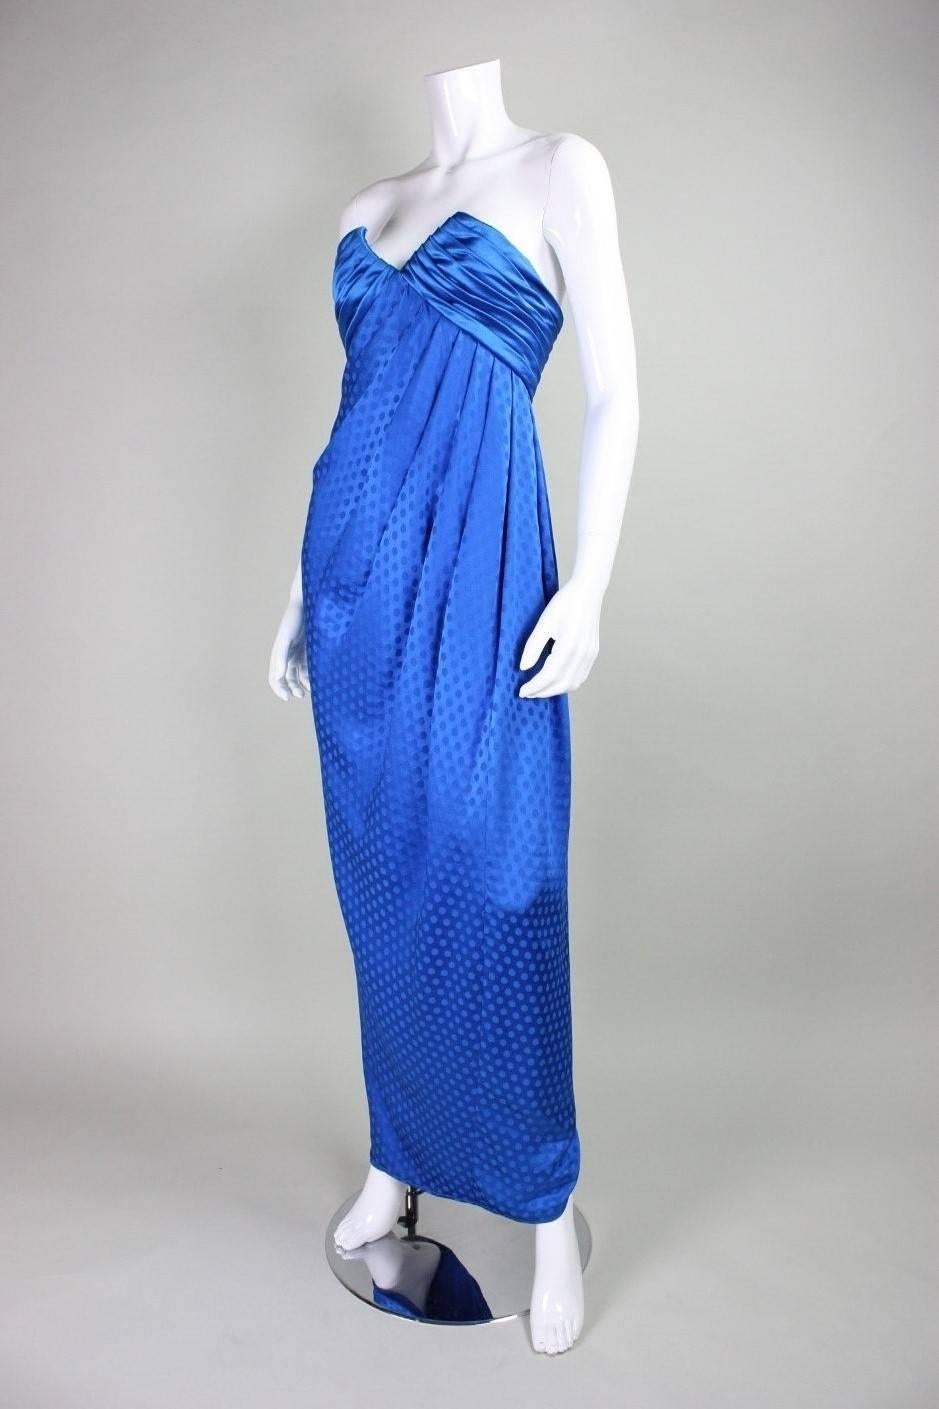 Emanuel Ungaro gown dates to the 1980's and is made of royal blue silk.  Strapless bodice has a v-neck and is pleated at bust.  Diagonal pleating radiates from the left under-bust downwards and creates an extremely flattering silhouette.  Lined. 